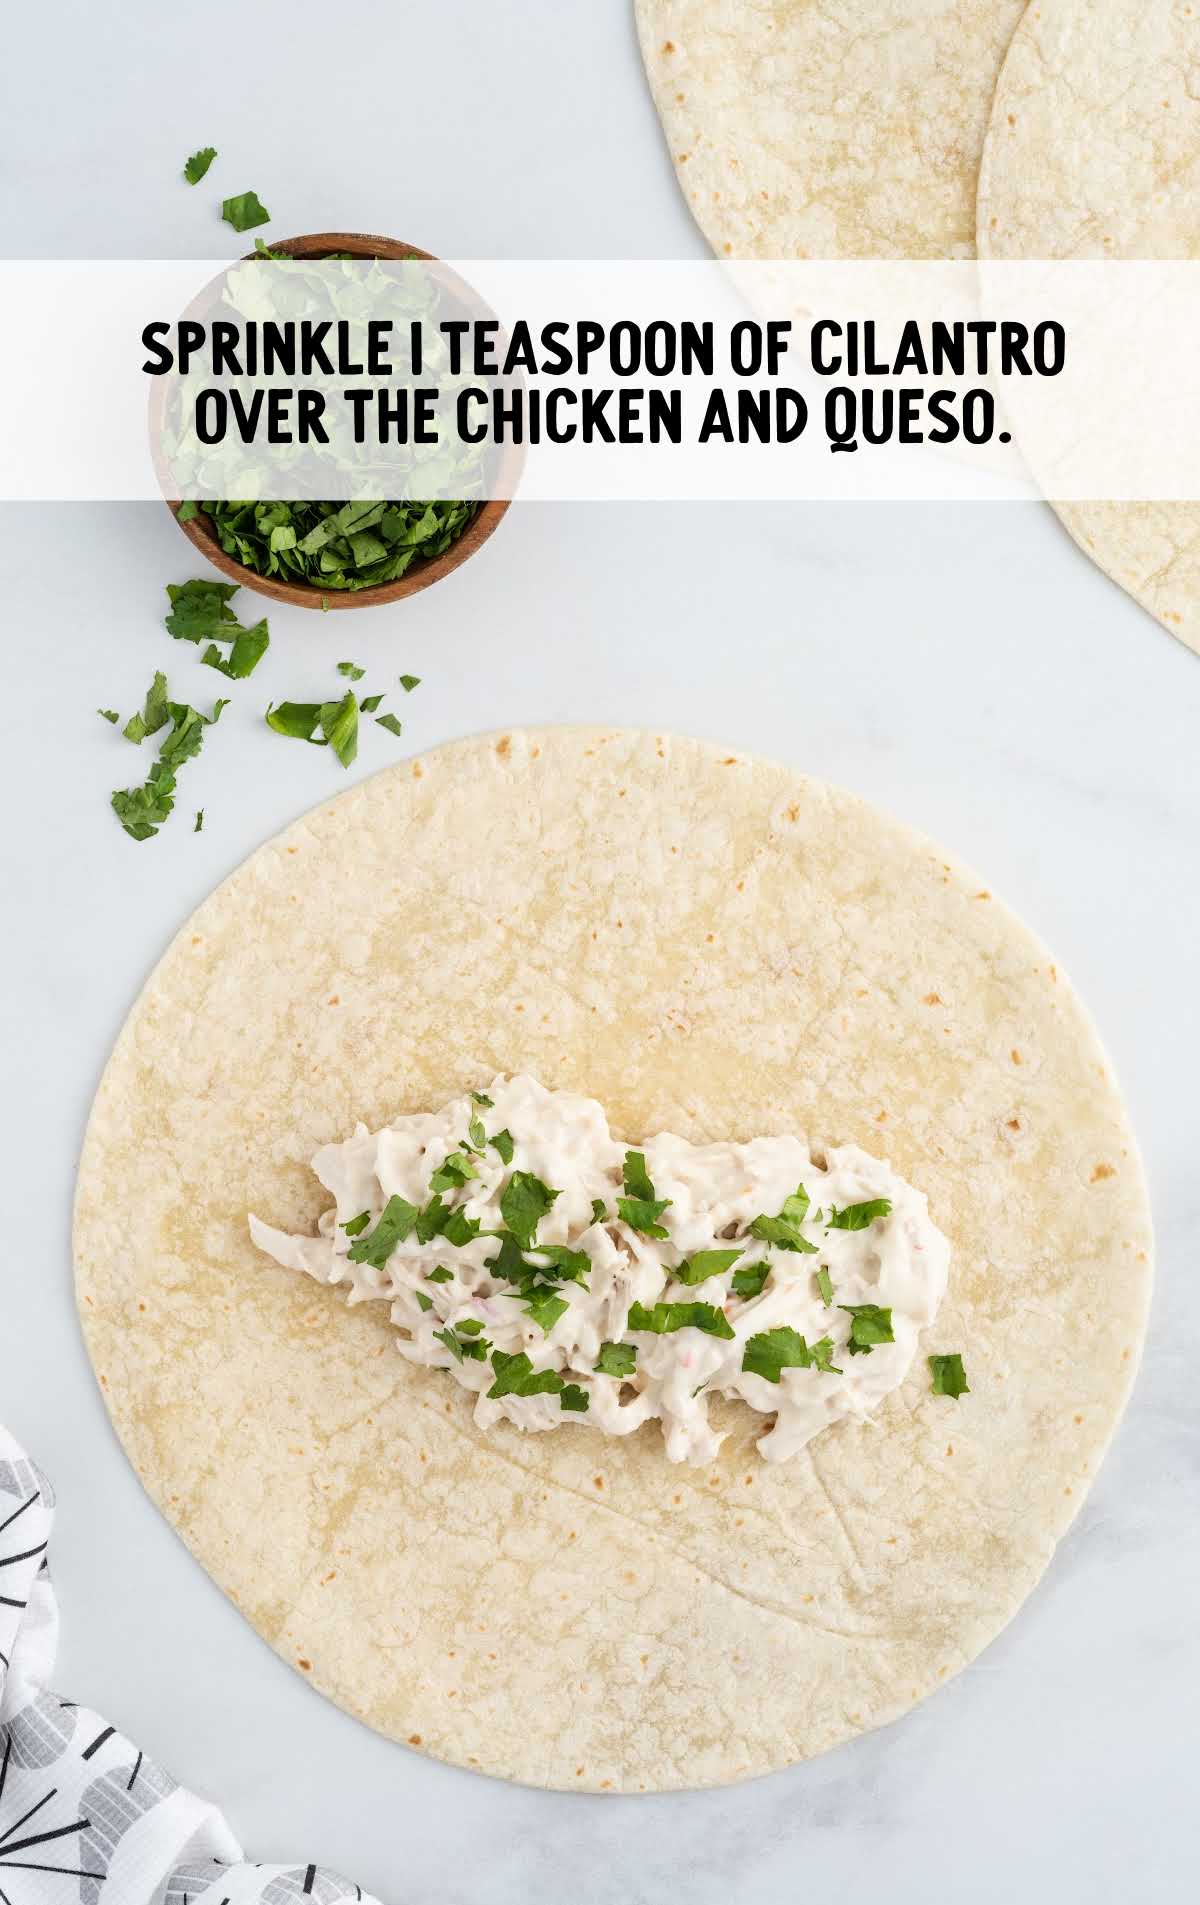 cilantro sprinkled over the chicken and queso